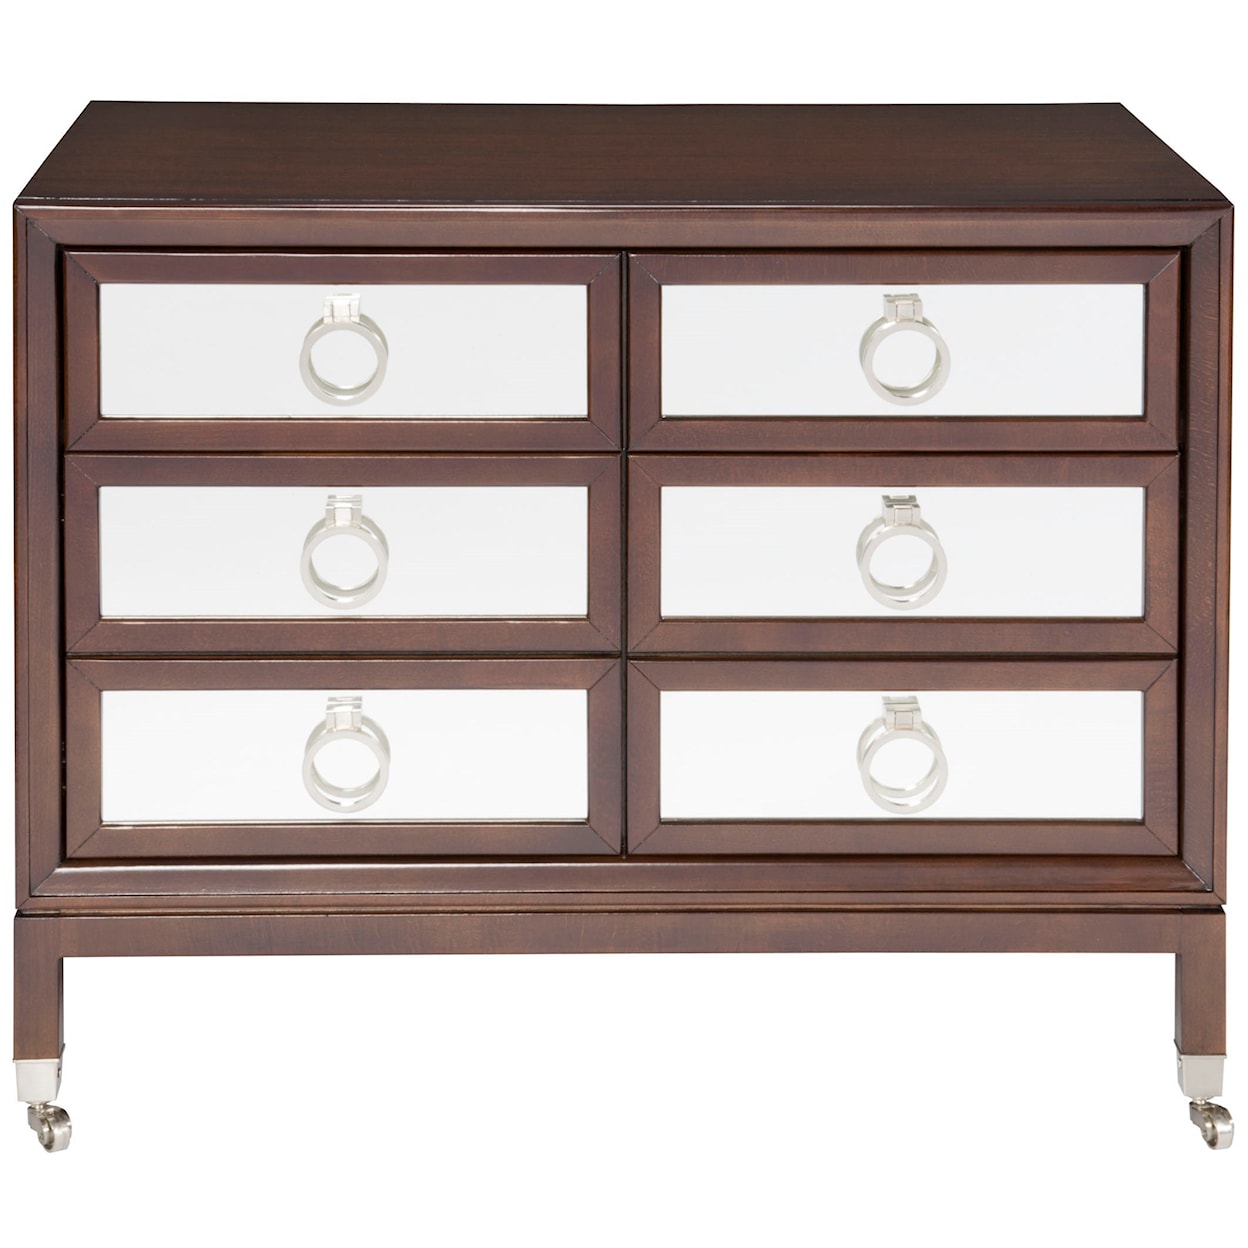 Vanguard Furniture Accent and Entertainment Chests and Tables Accent Chest